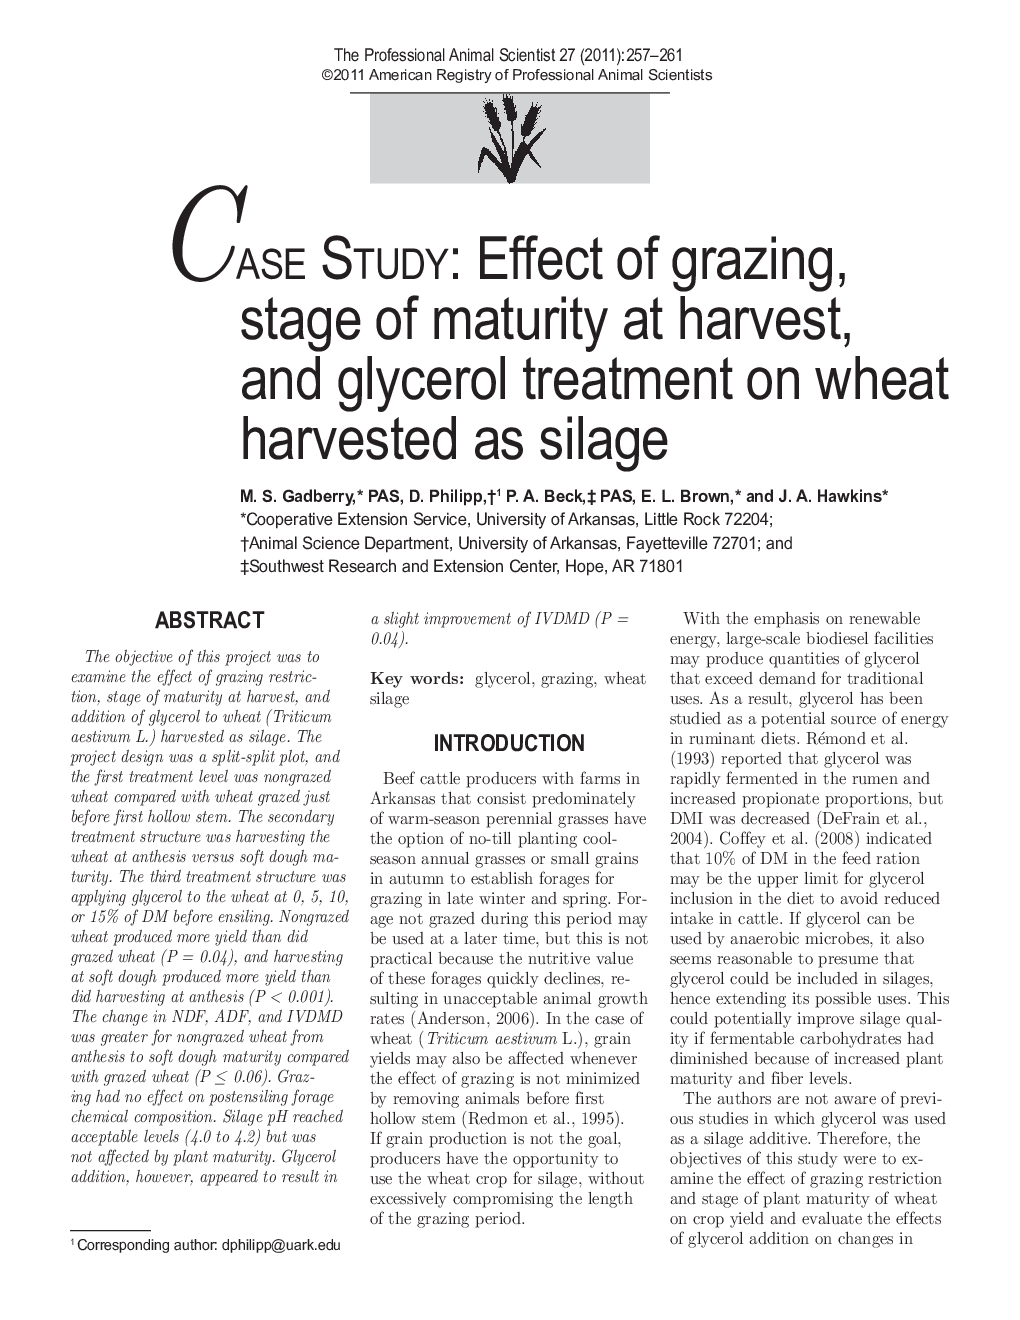 CASE STUDY: Effect of grazing, stage of maturity at harvest, and glycerol treatment on wheat harvested as silage